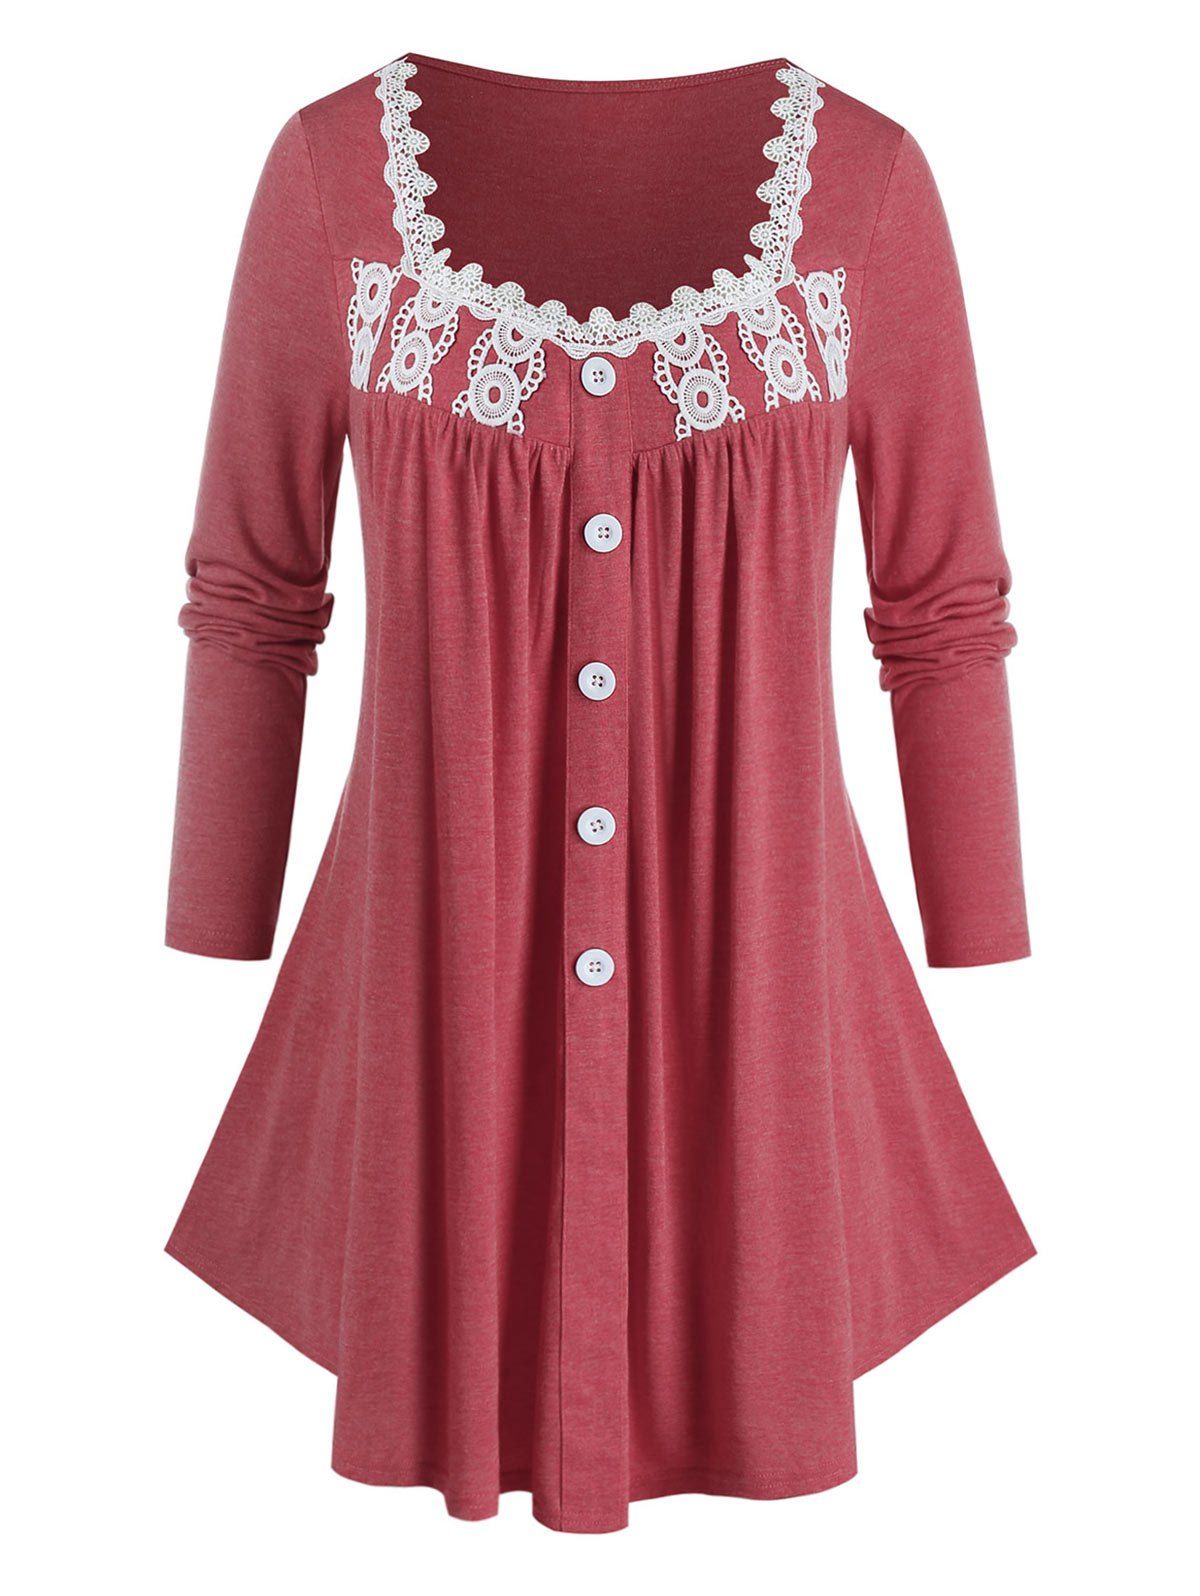 Plus Size Applique Panel Long Sleeve Tunic Tee - RED 4X